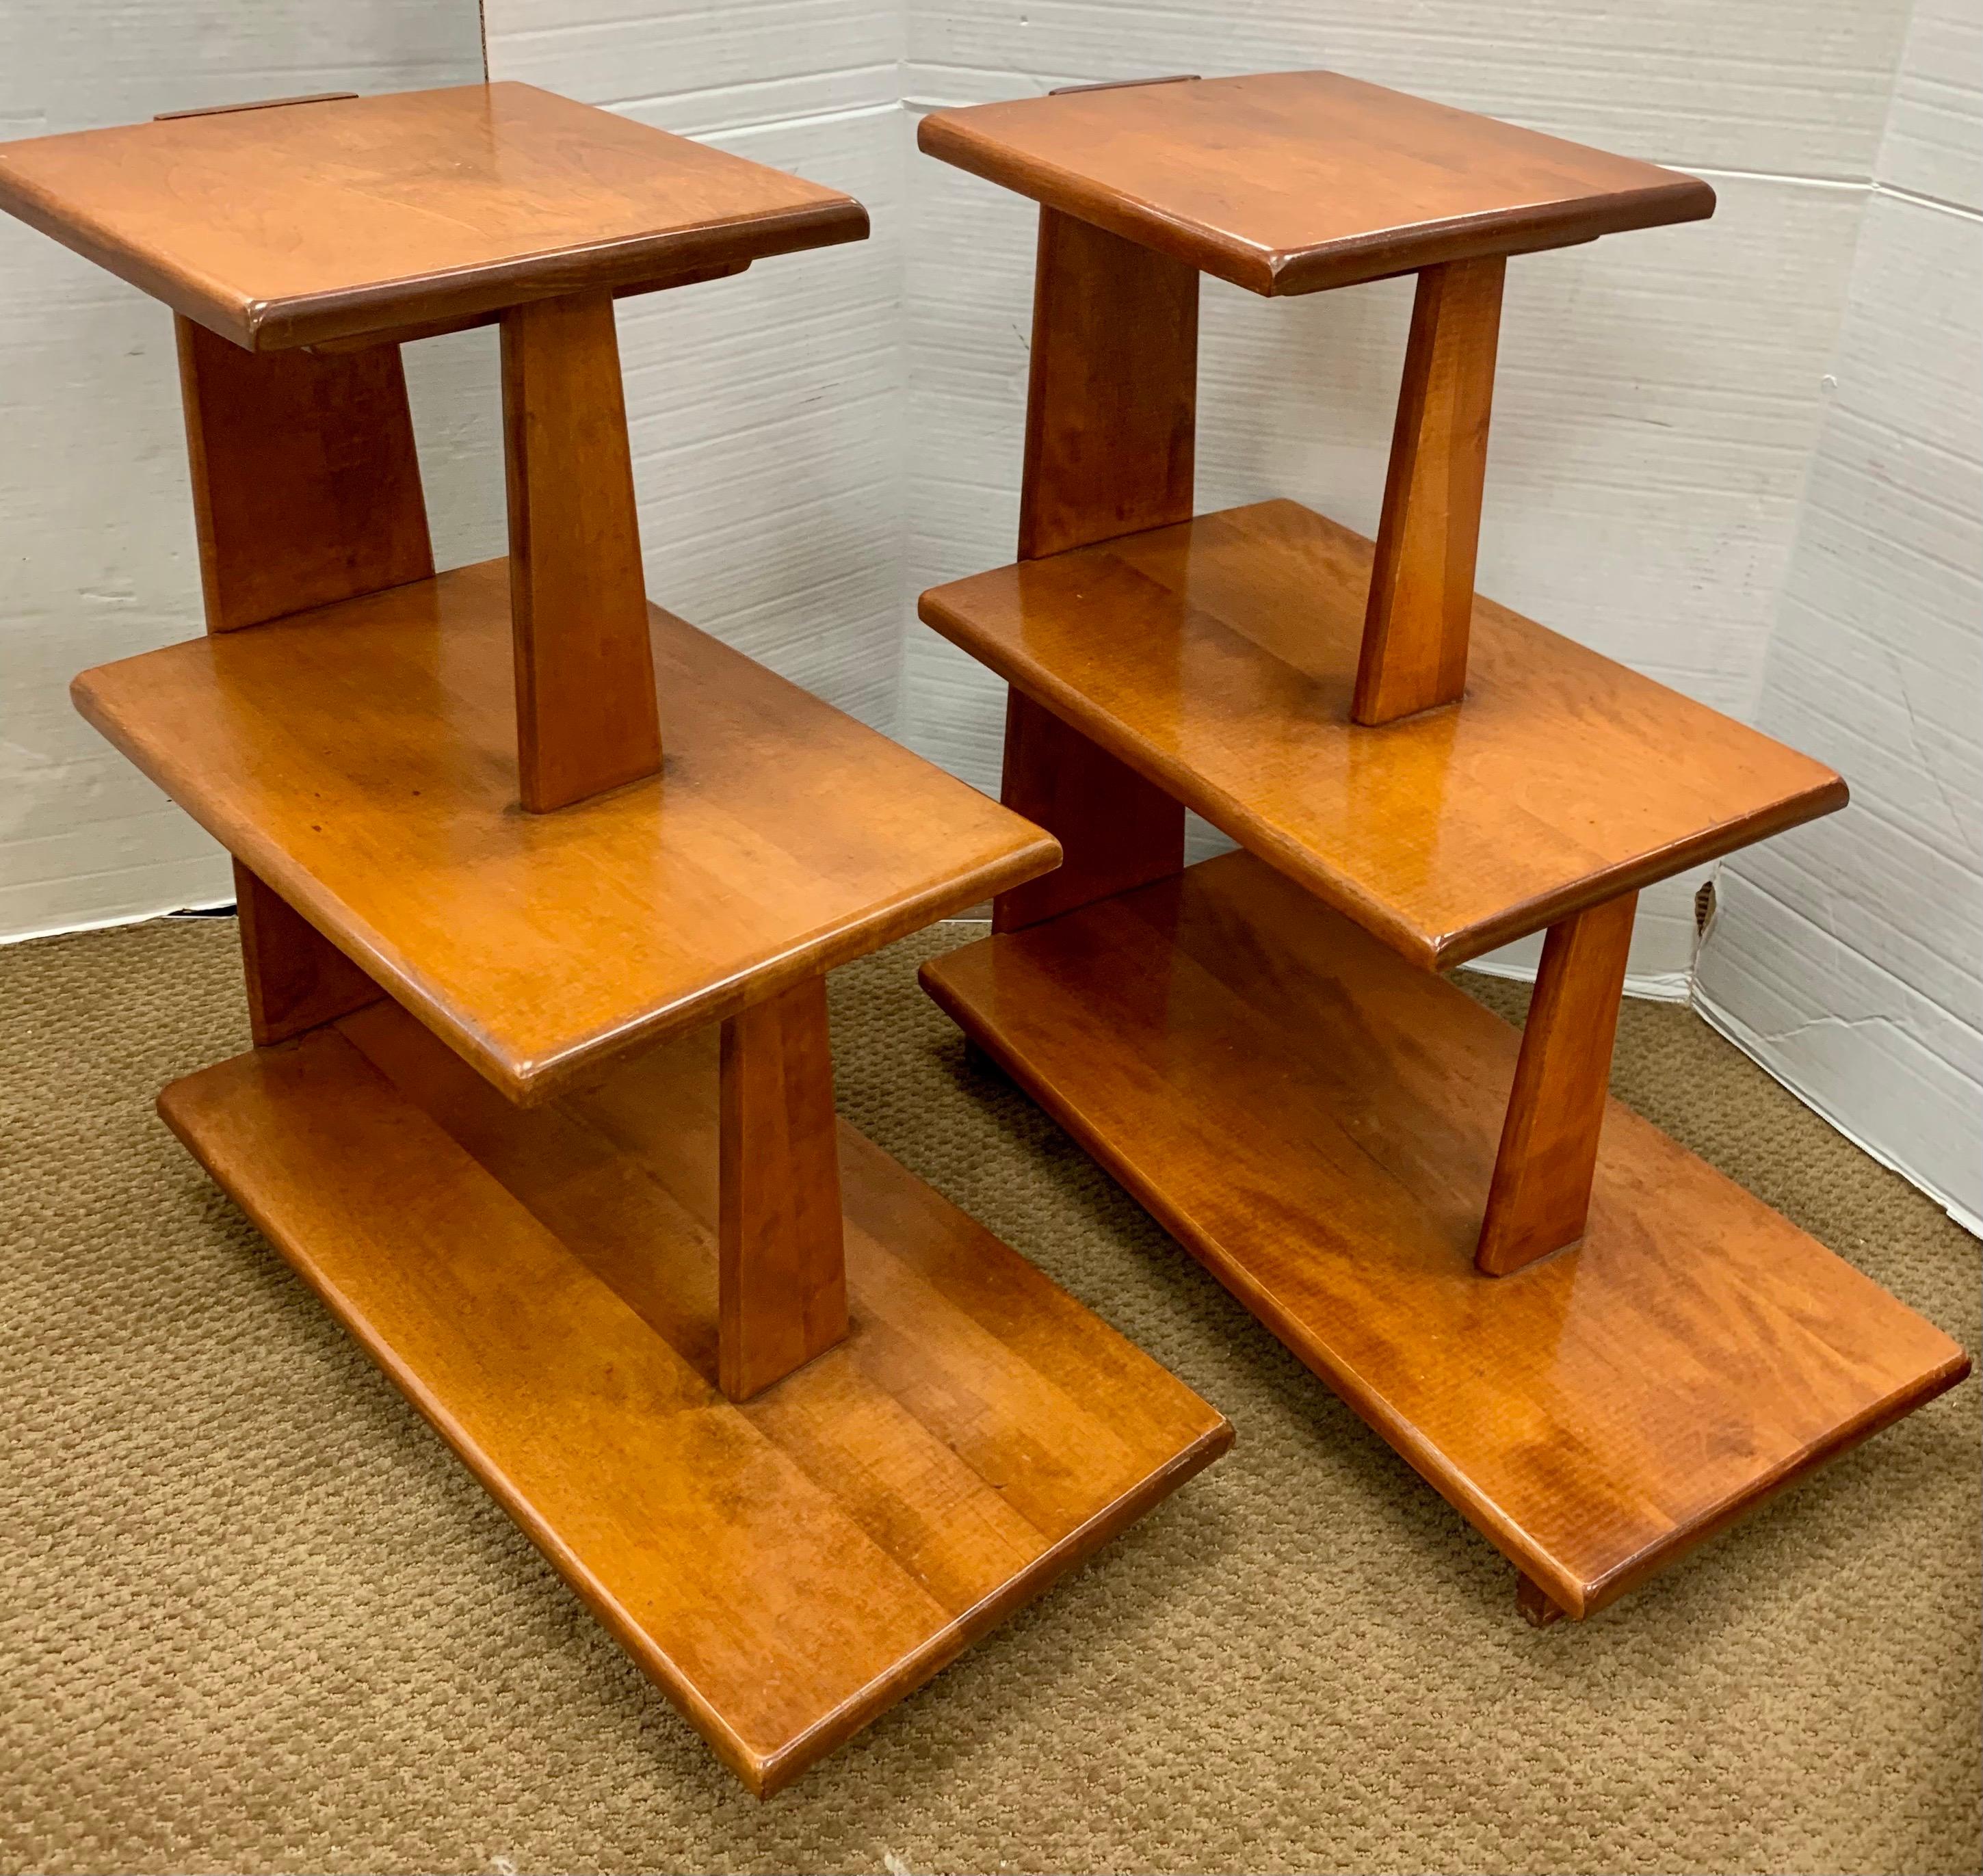 Accent your midcentury living space with these three tiered accent tables which offer displayable storage space.